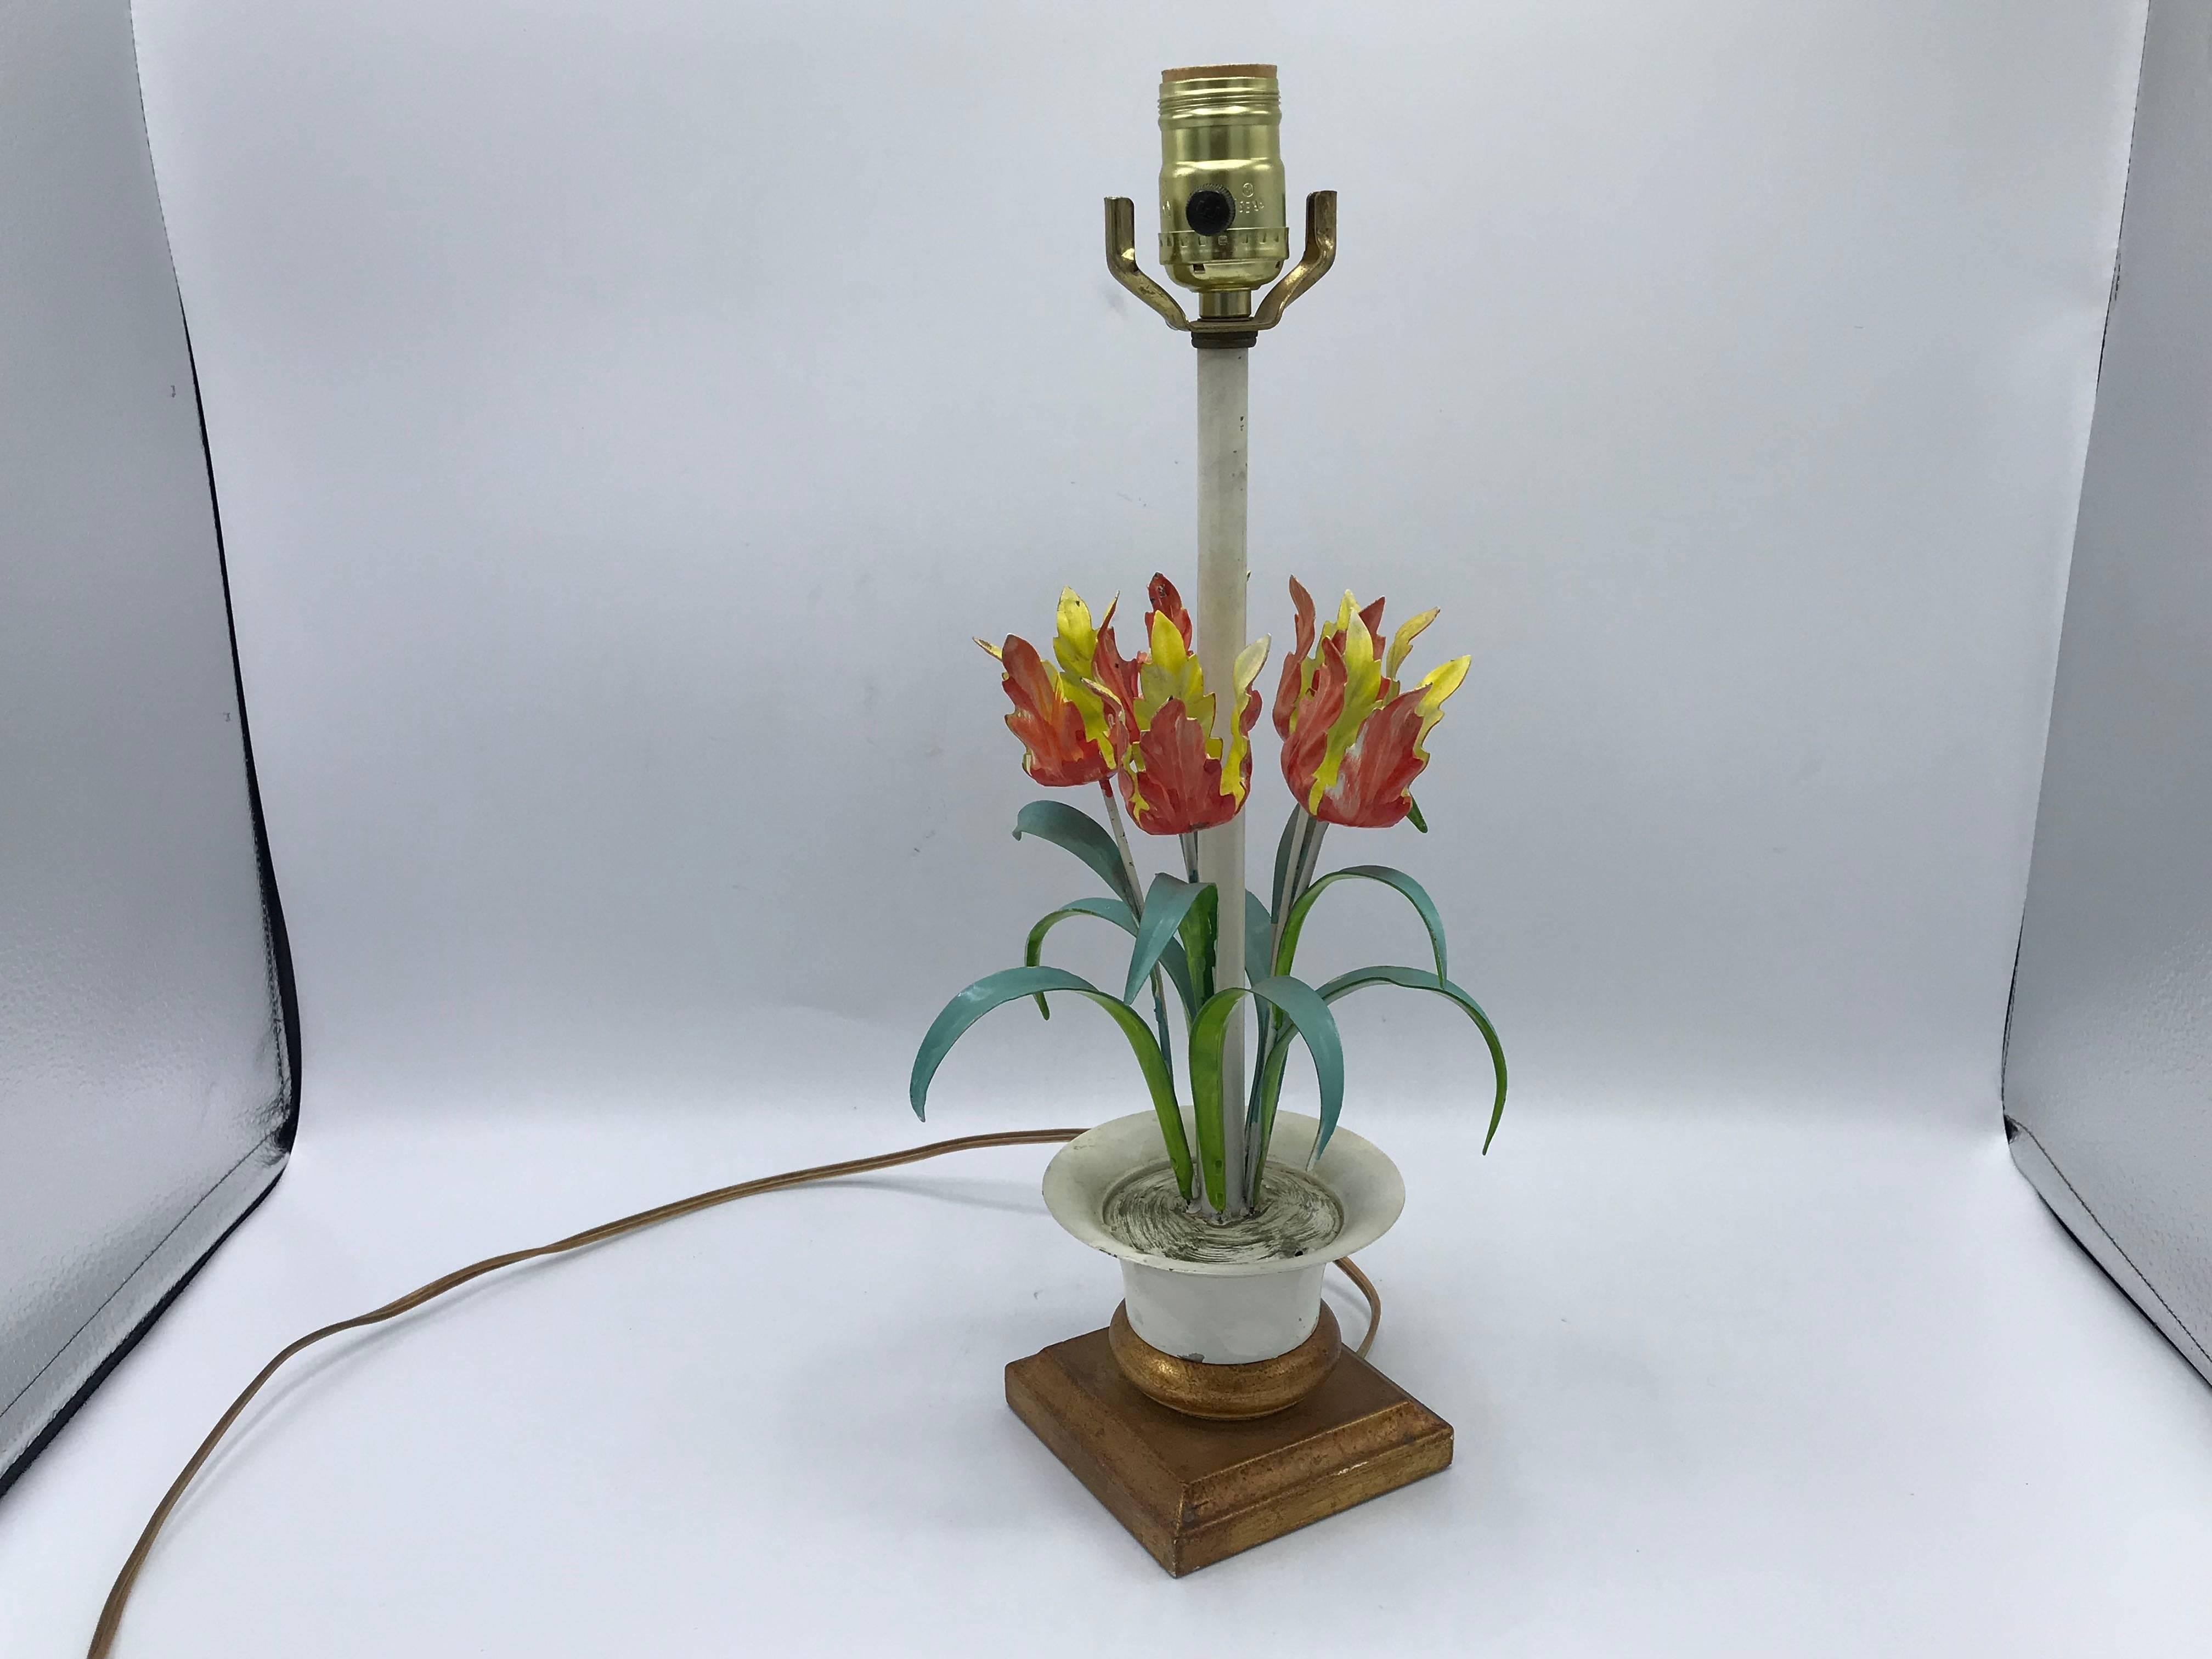 Offered is a stunning, 1970s Italian hand-painted tole tulip lamp. The piece is mounted on a gilded Florentine base.